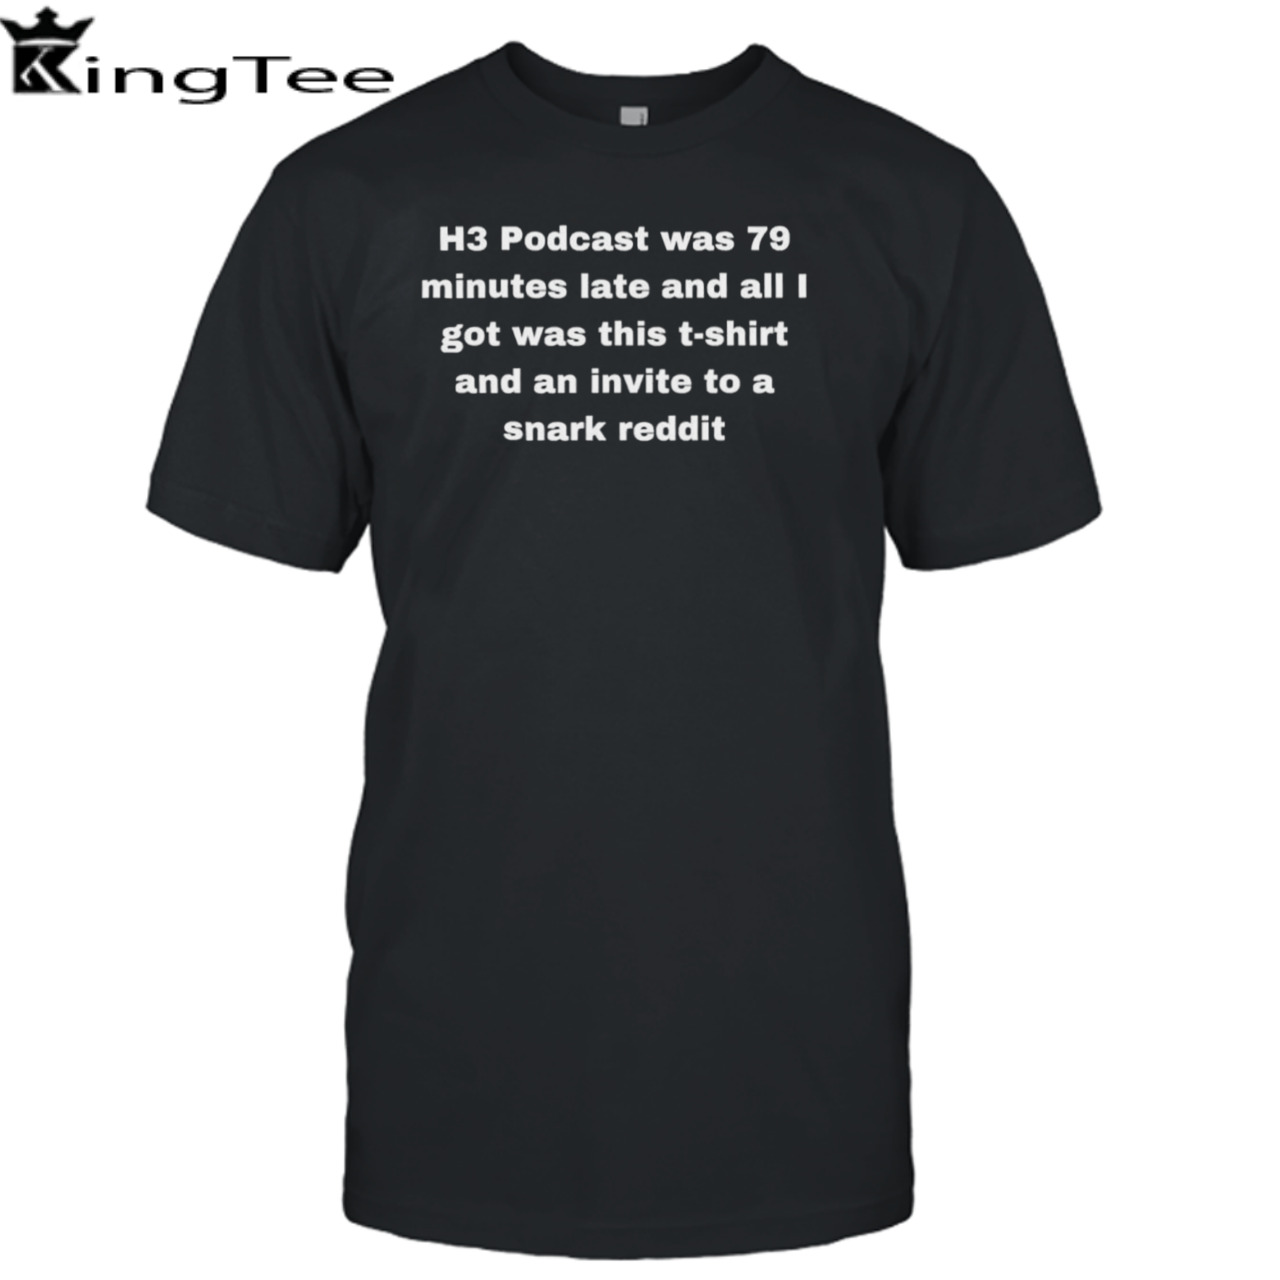 H3 podcast was 79 minutes late and all I got was this T-shirt and an invite to a snark reddit shirt